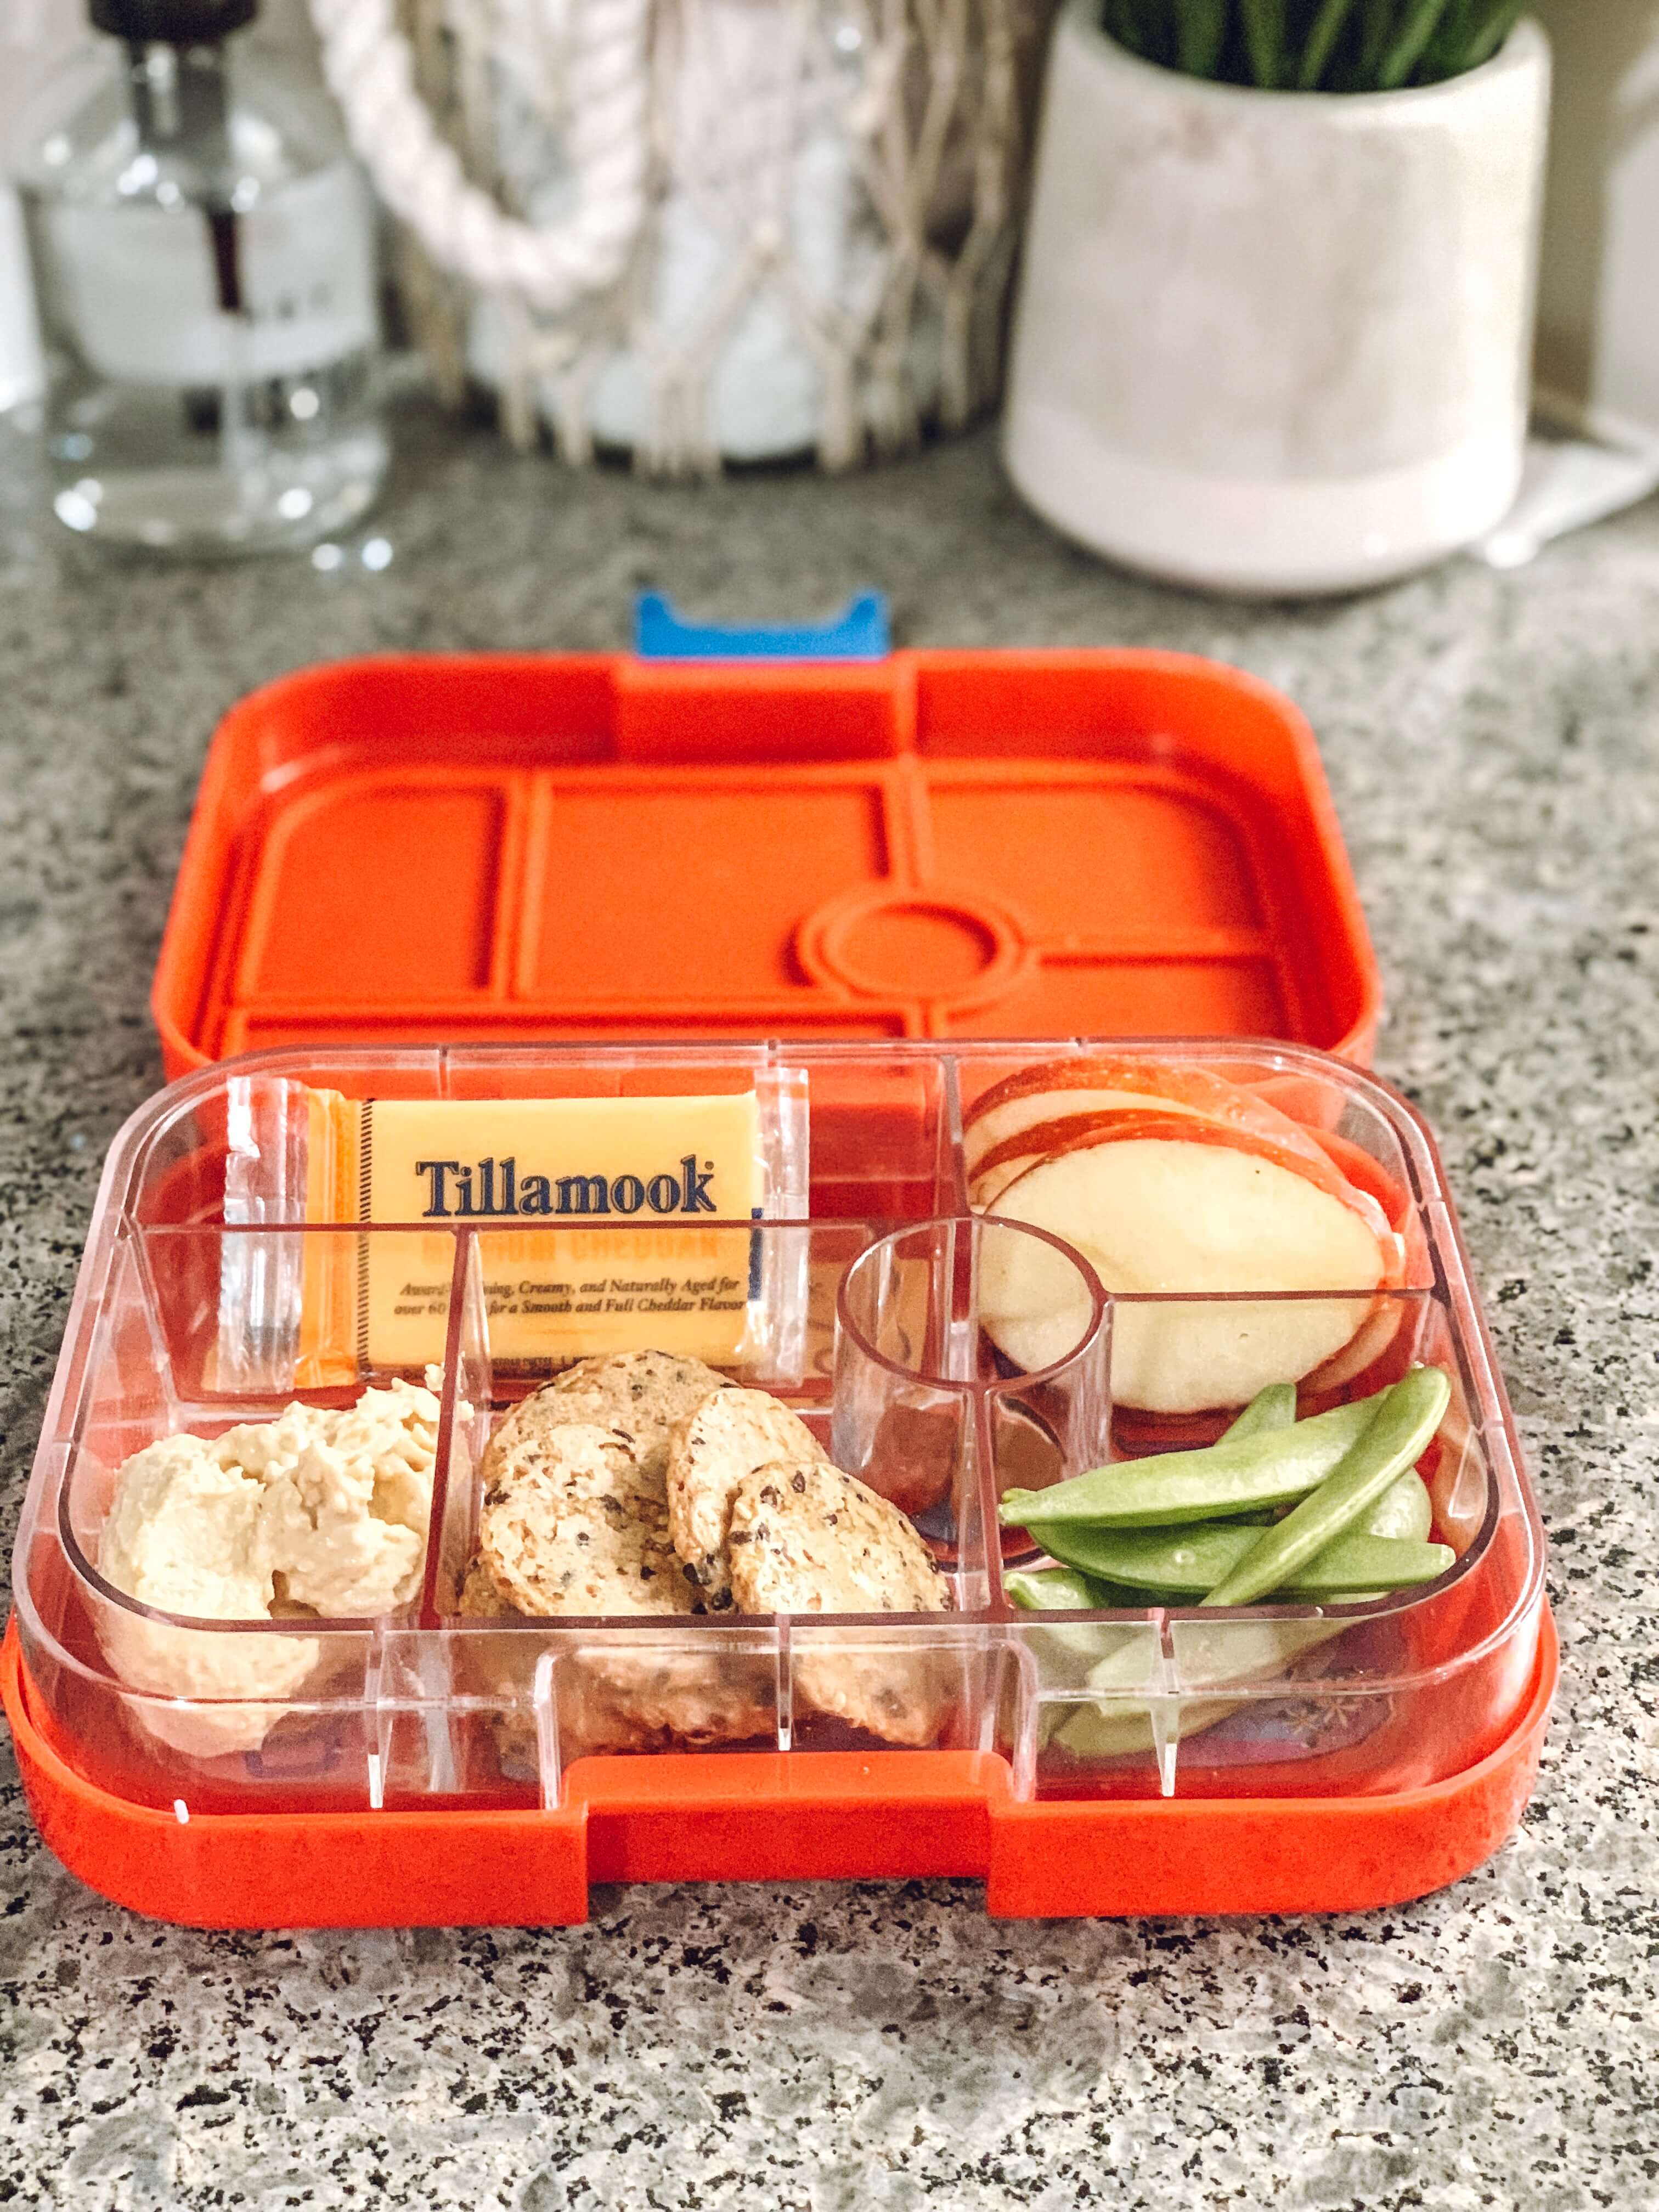 Pack Your April Lunches in Style with Yumbox Bento Boxes